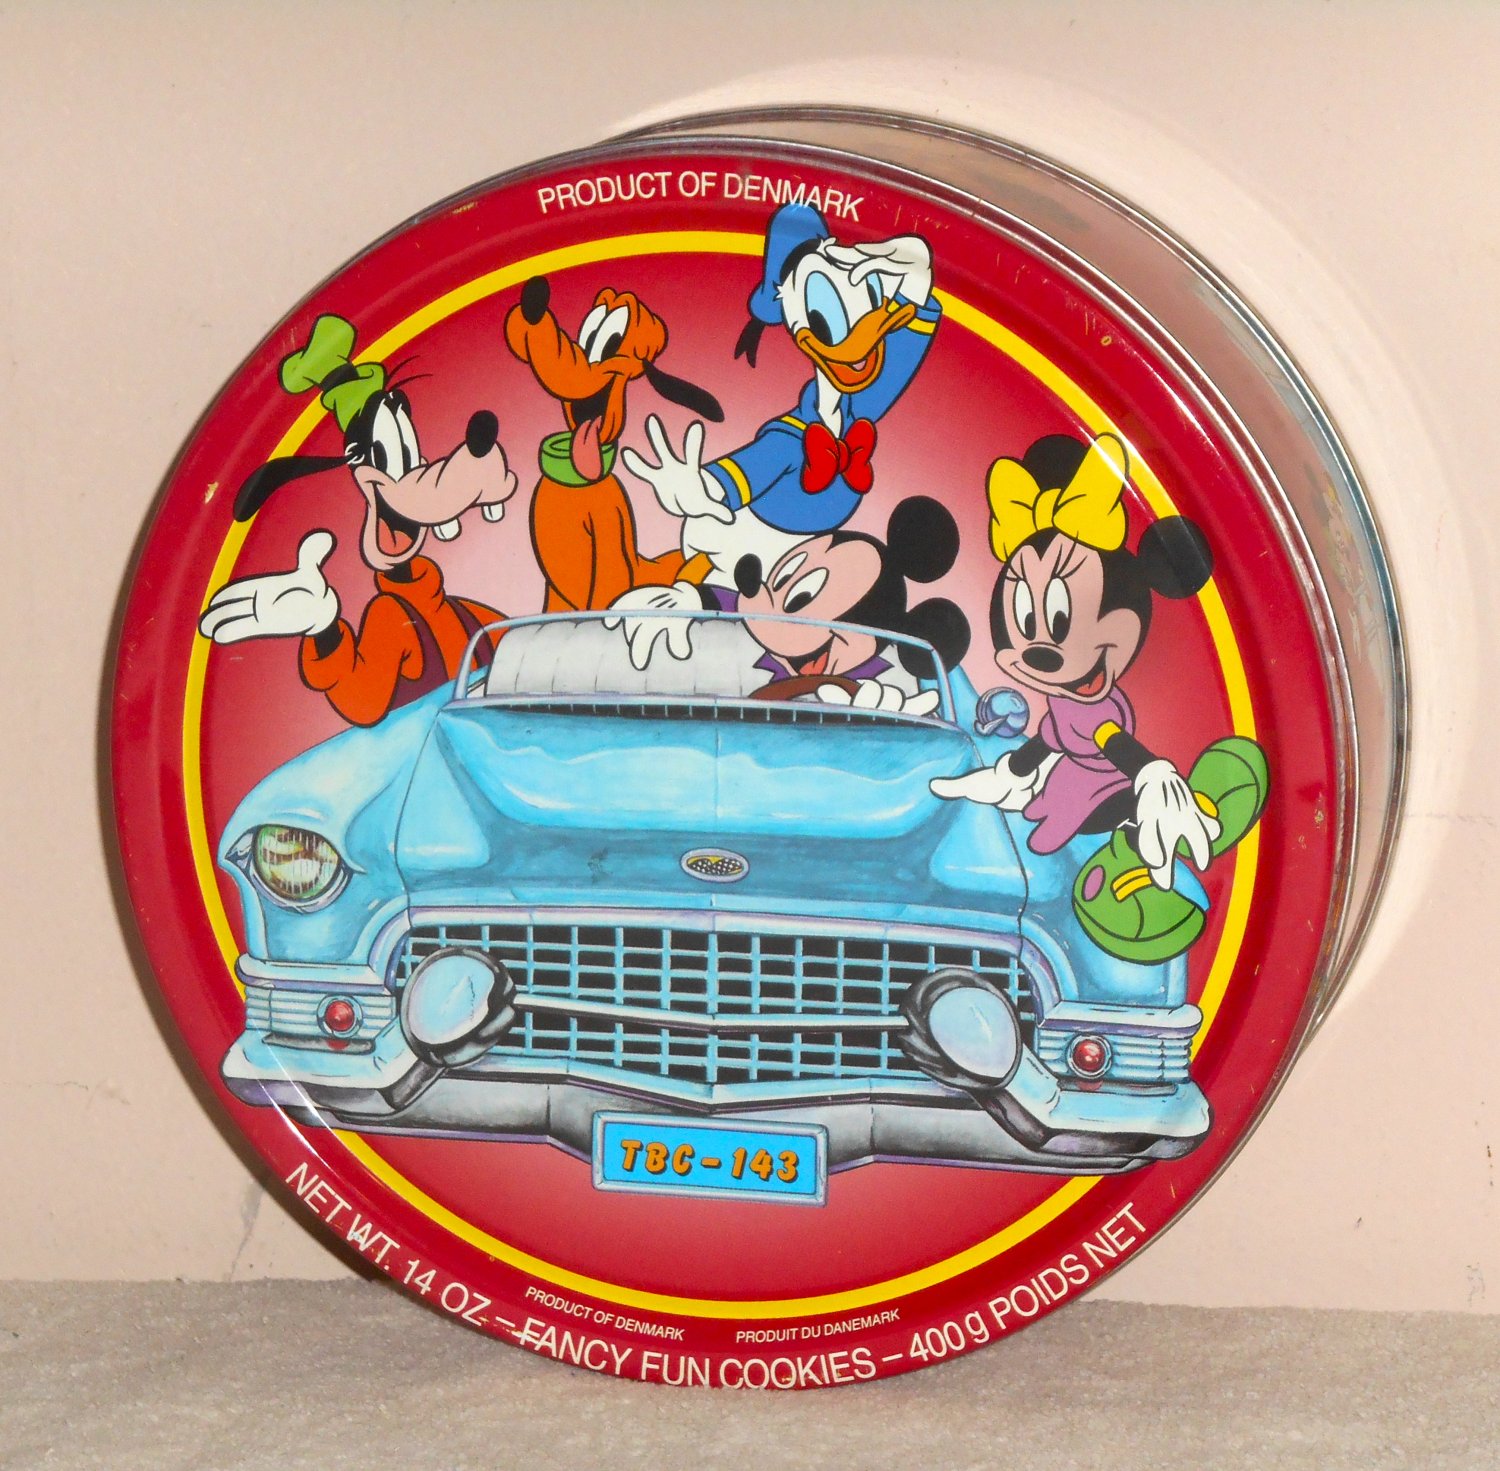 Disney Tin Can Box Lot 7Â½ Inch Dansk Cookie Mickey Minnie Mouse Love Pink 1950s Car TBC-143 Pluto